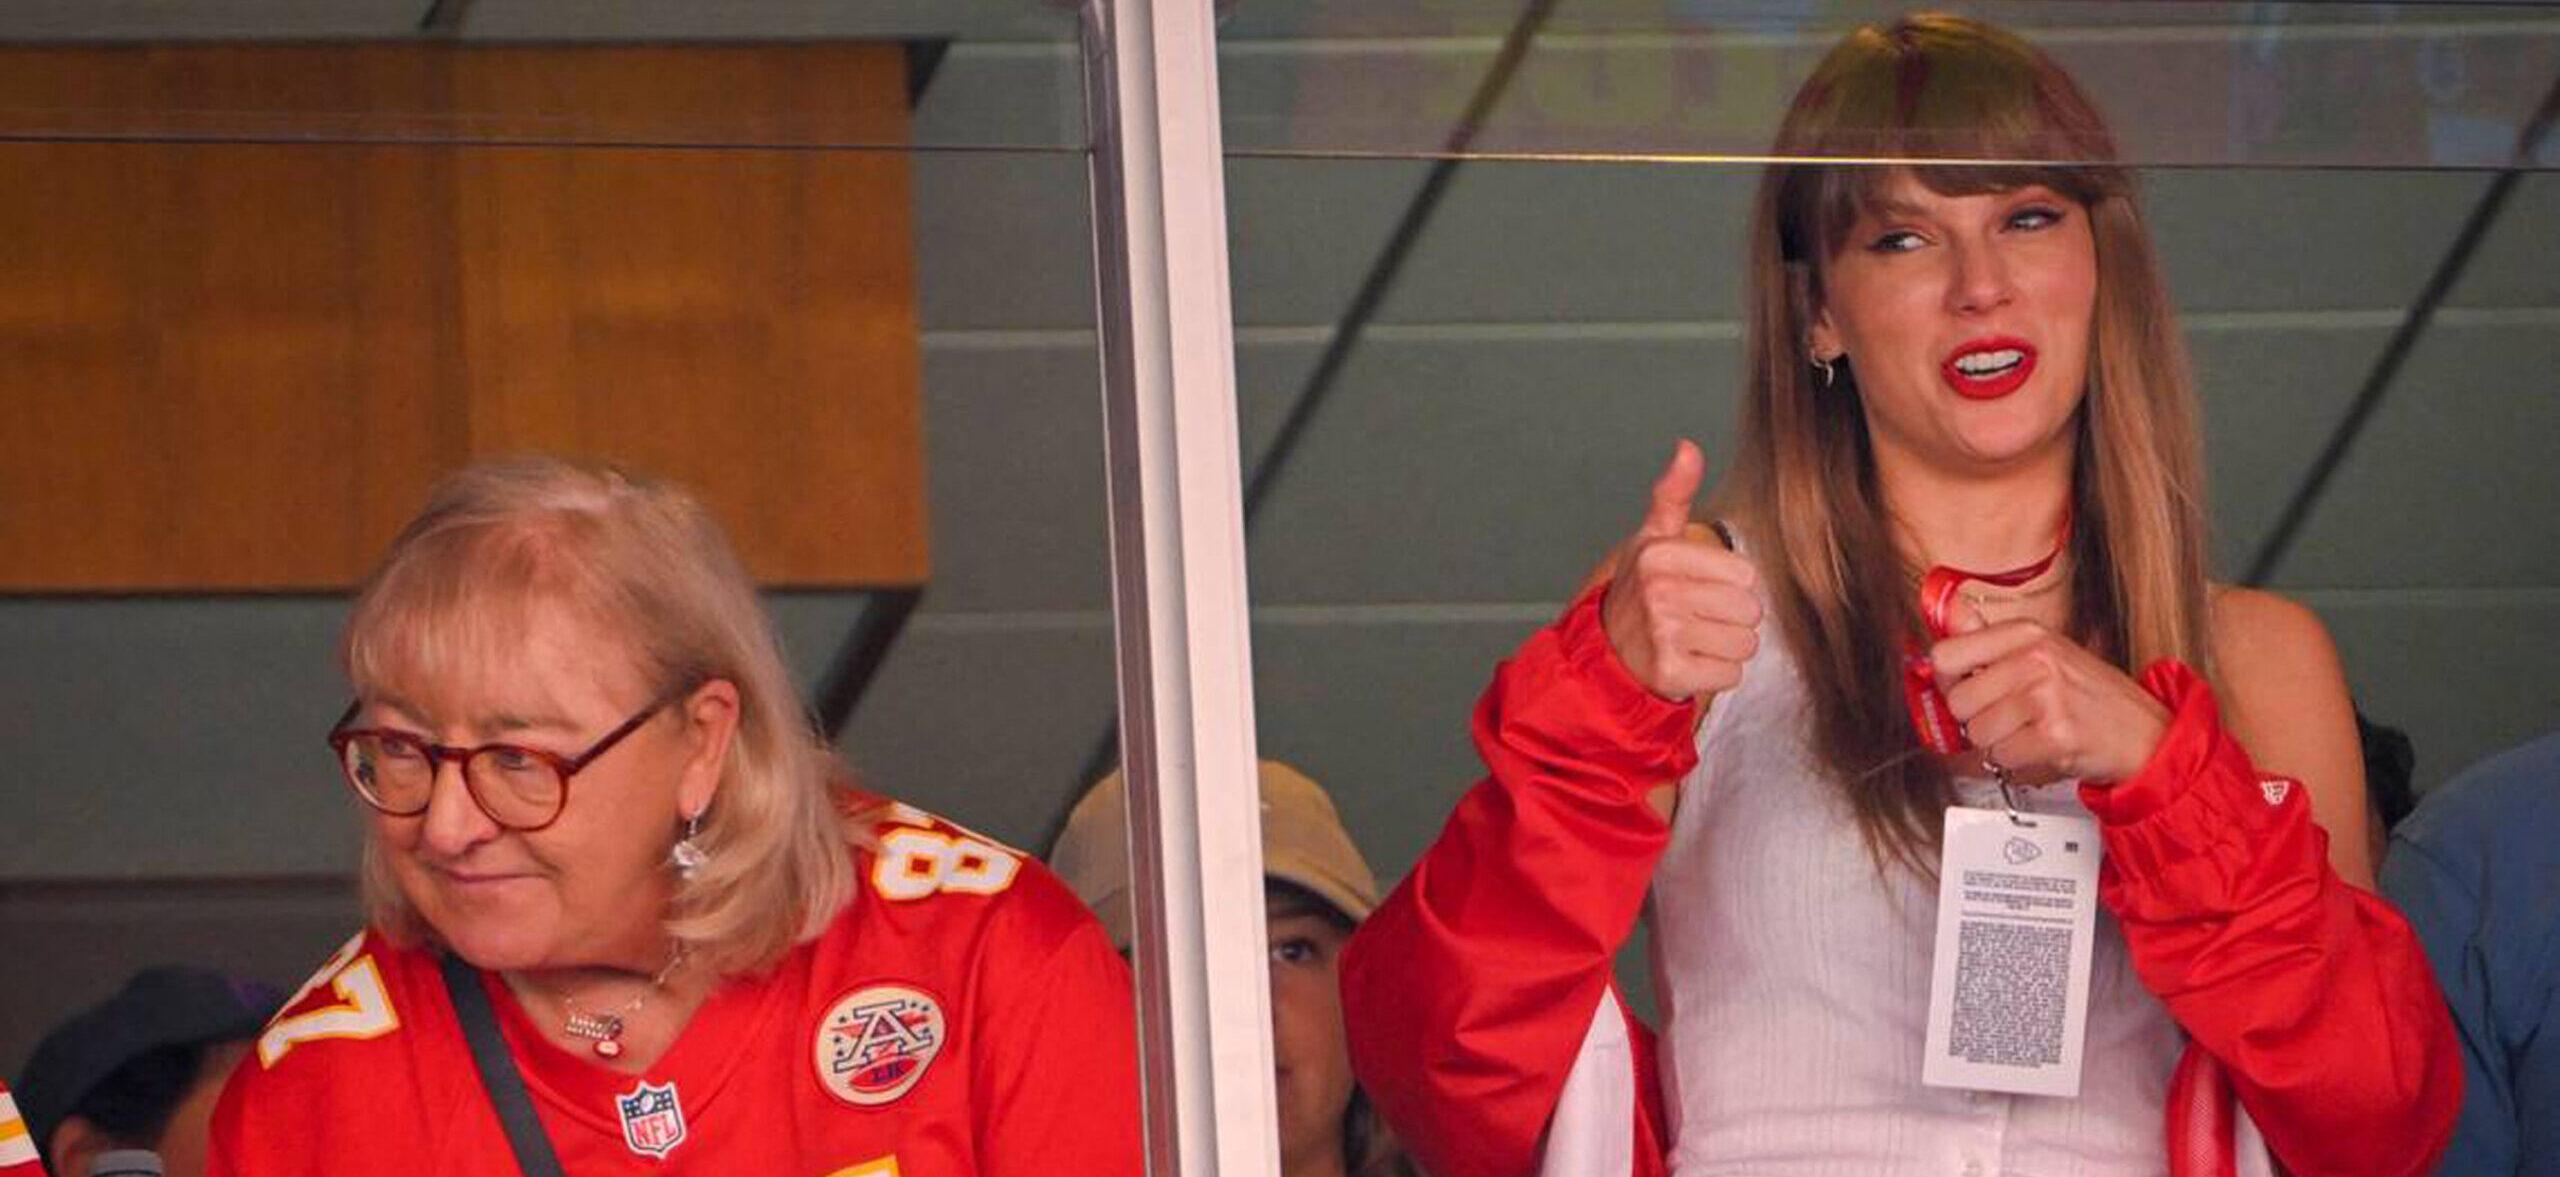 Fans Slam Taylor Swift For Chiefs Loss: ‘She’s Yoko Ono-ing the Chiefs’